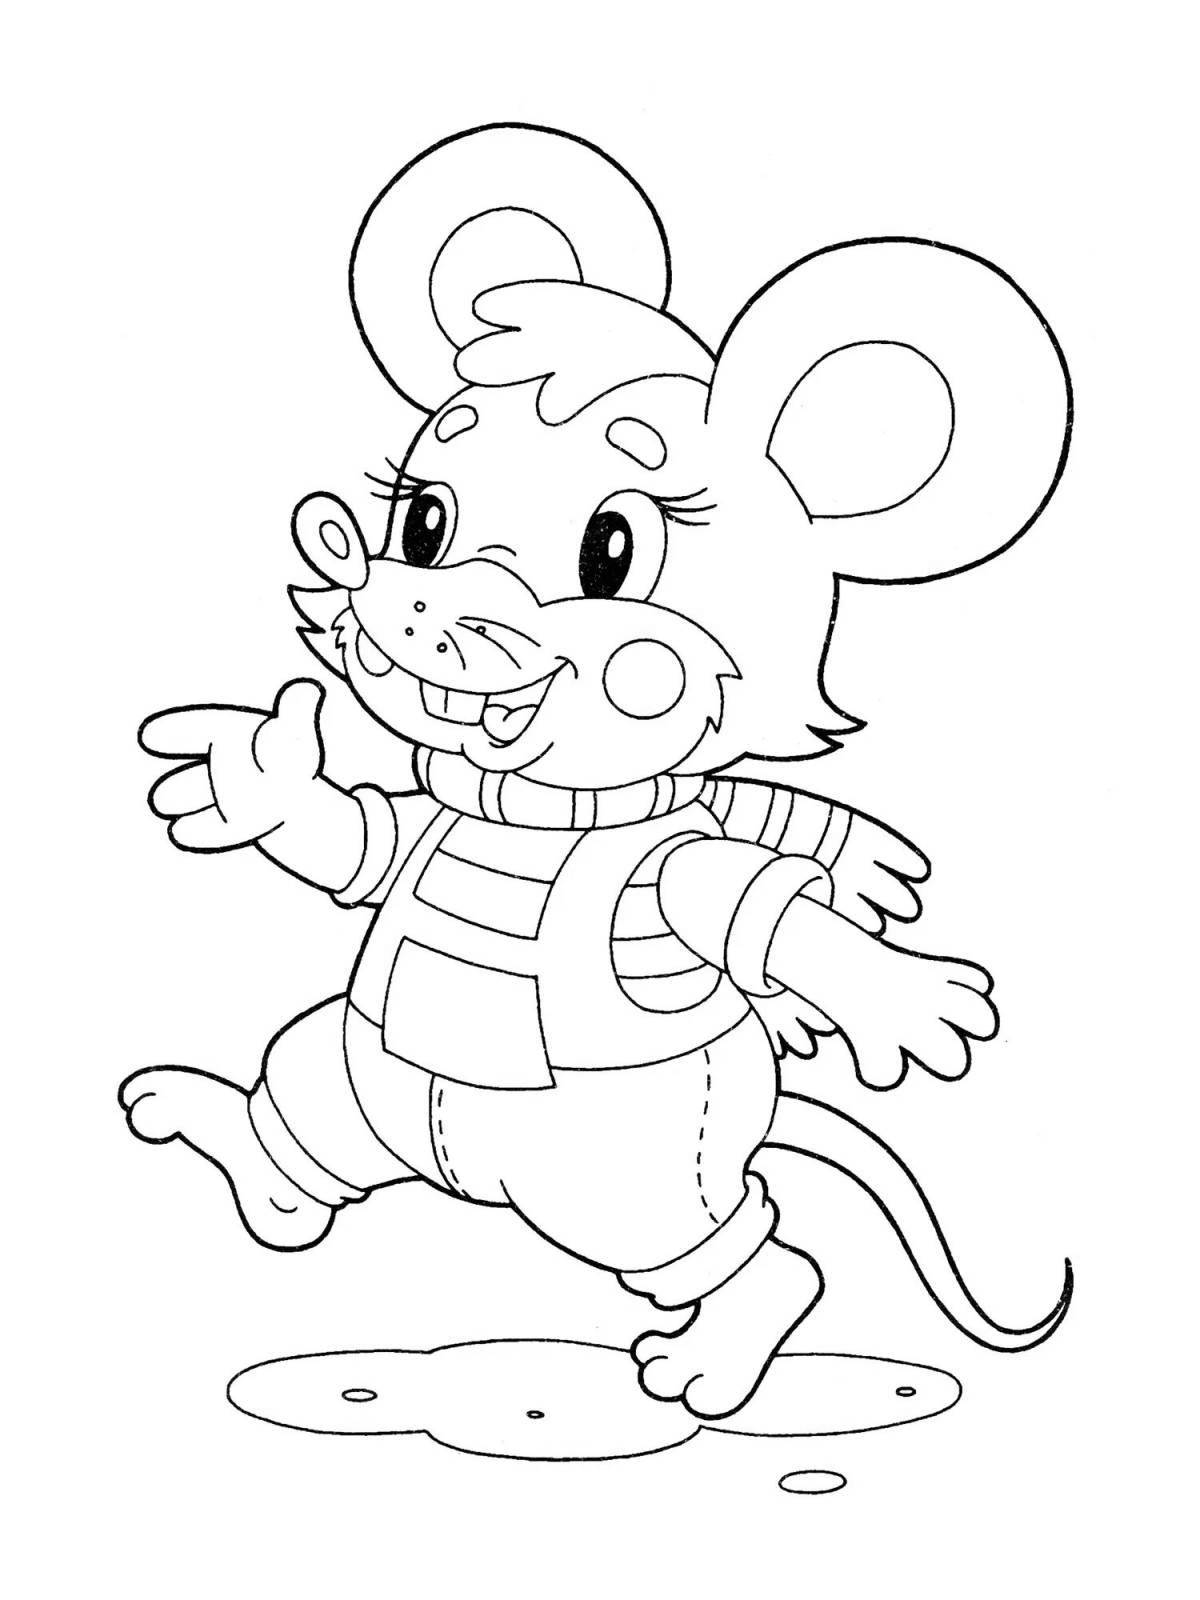 Coloring lively mouse team